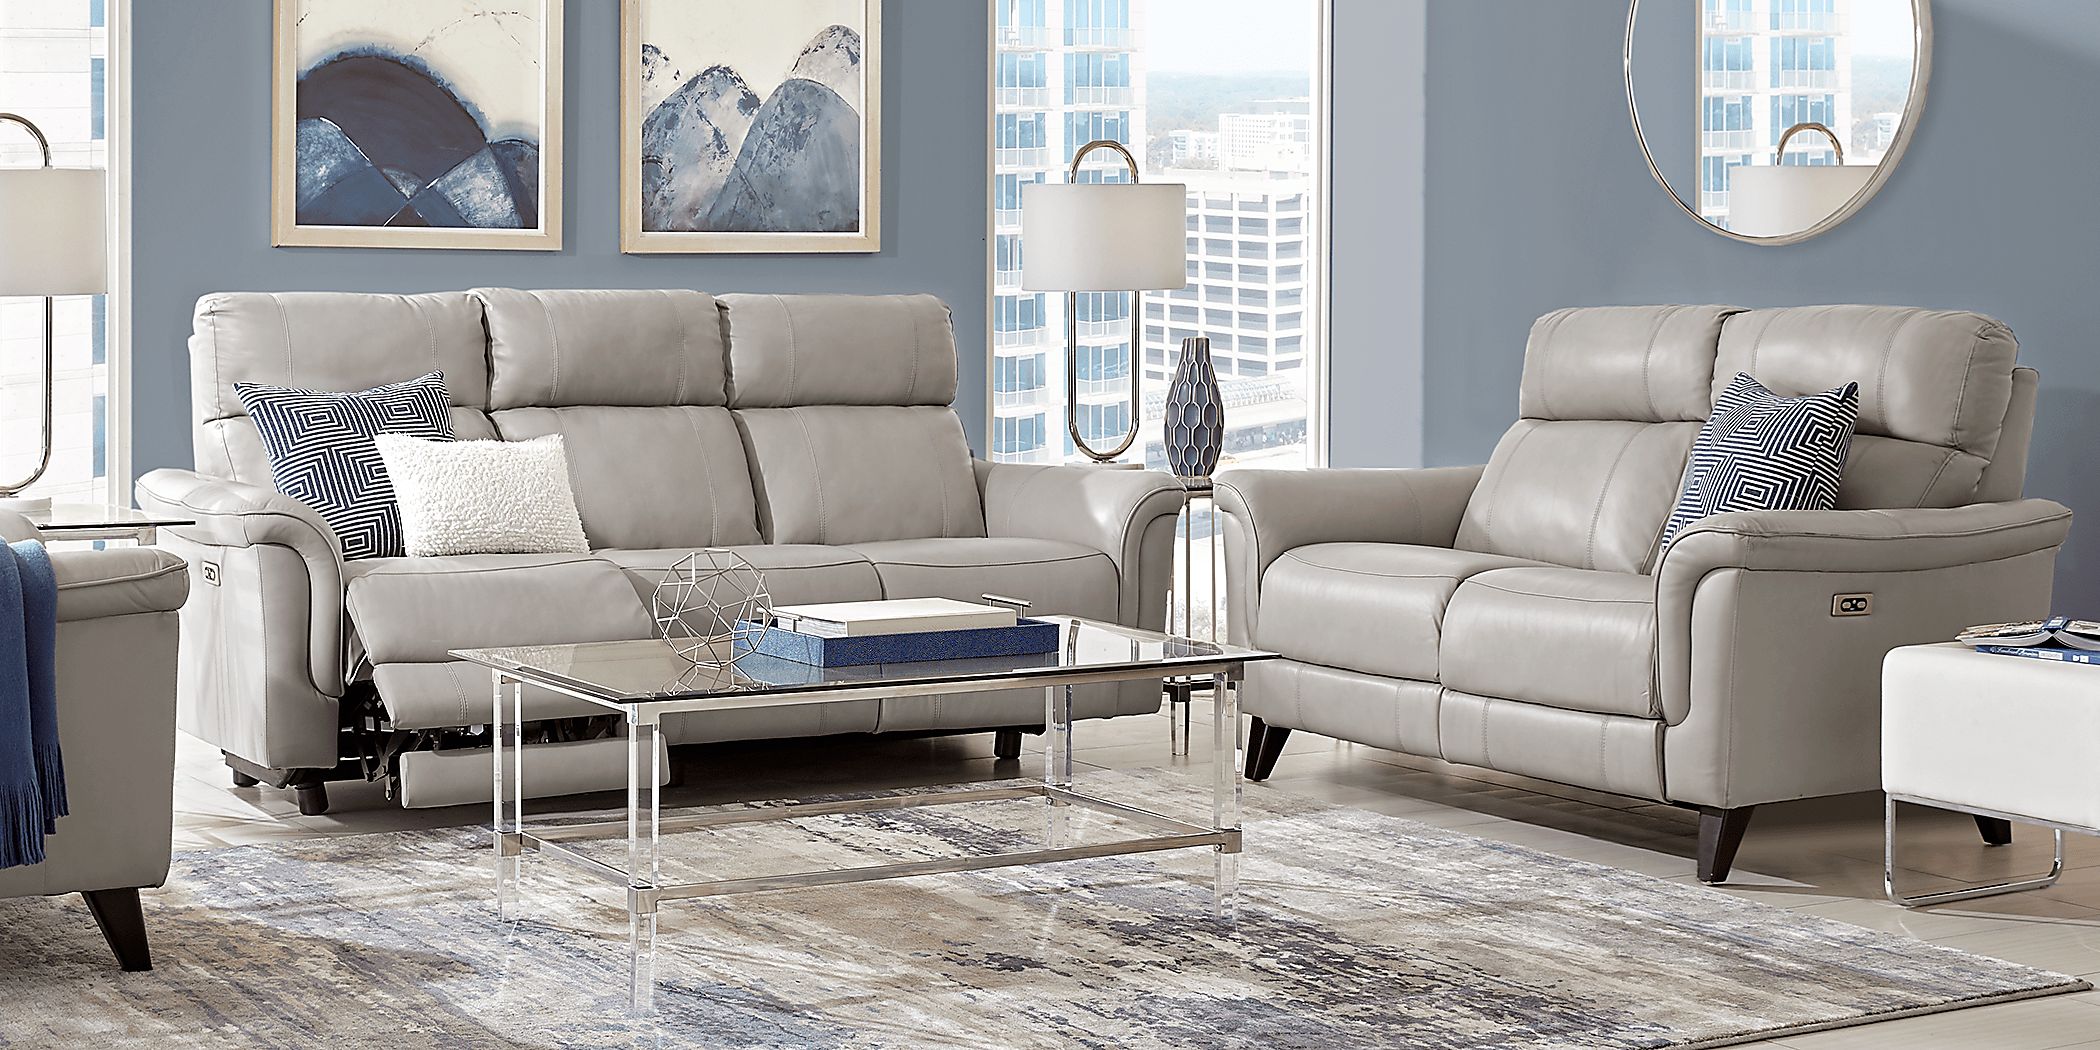 Cindy Crawford Home Avezzano Stone 2 Pc Leather Living Room with Dual Power Reclining Sofa